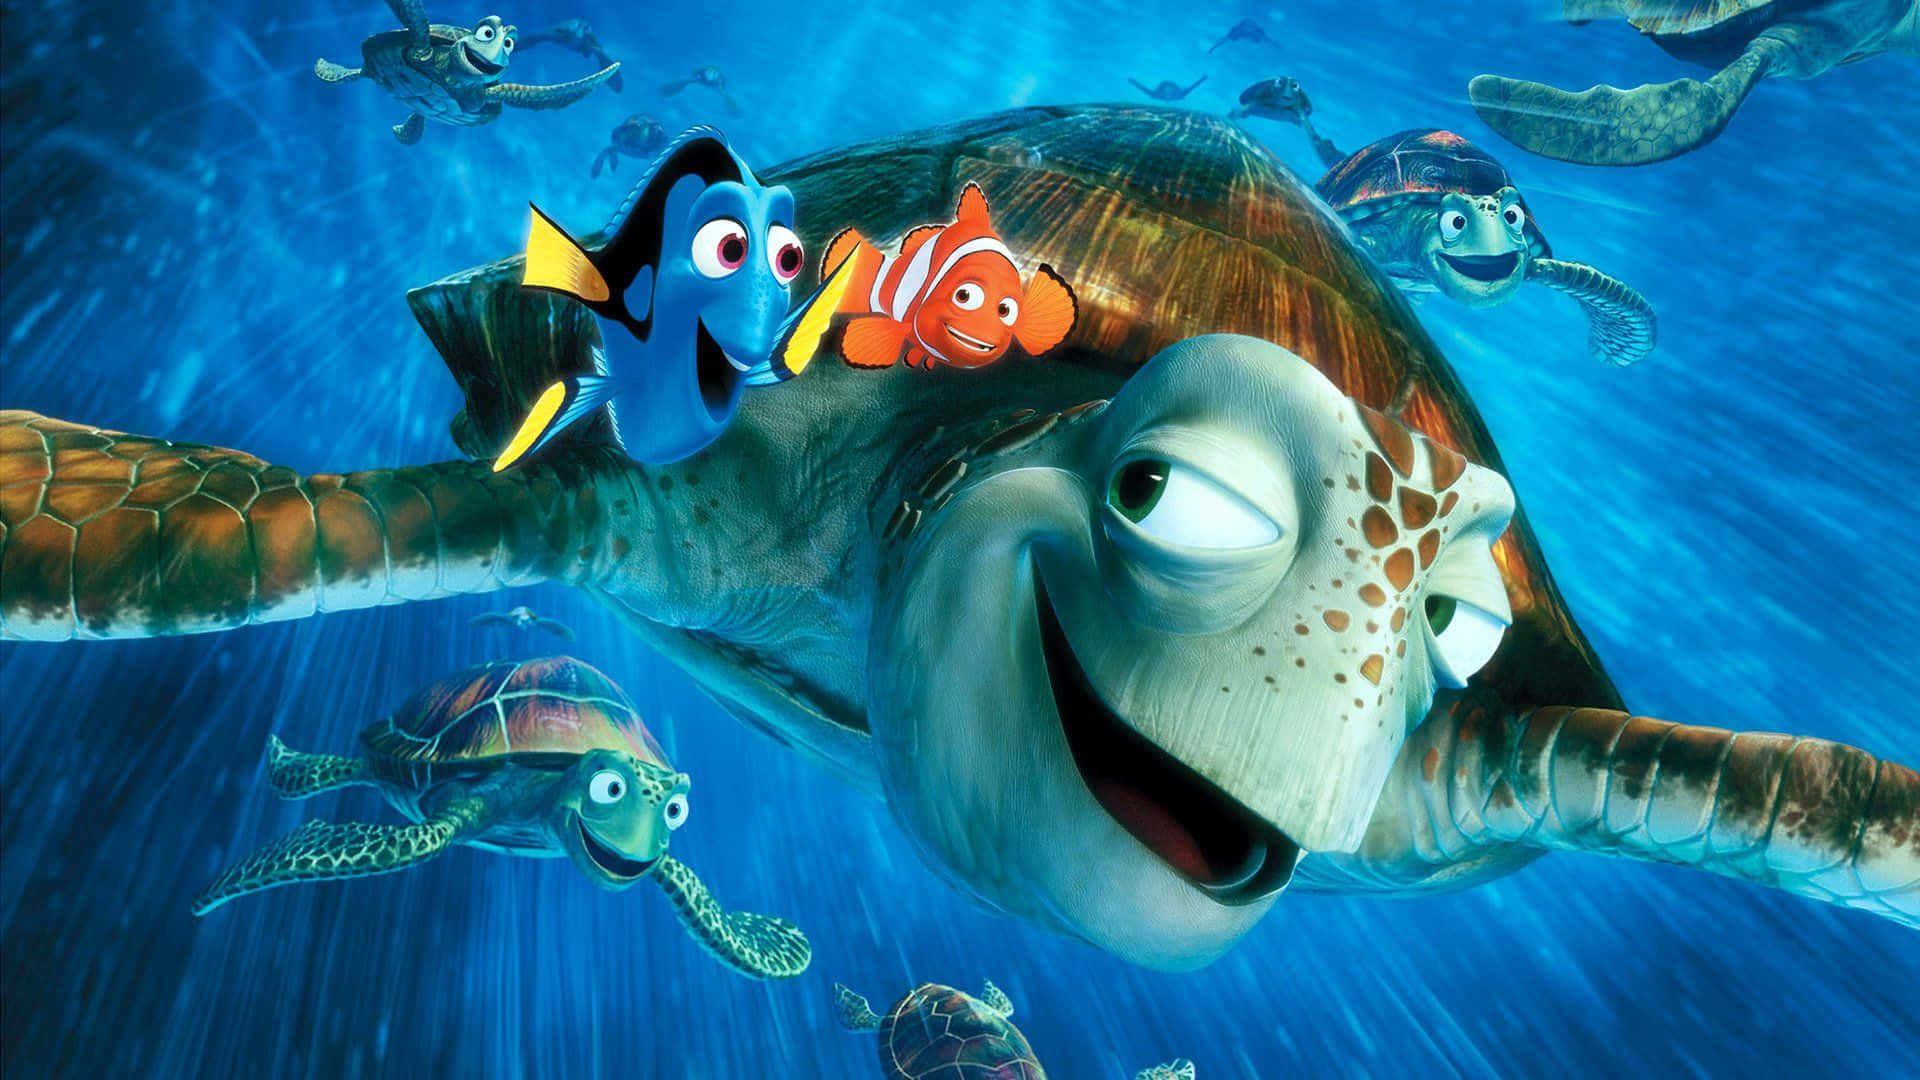 A Vibrant Underwater Adventure with Nemo and Friends